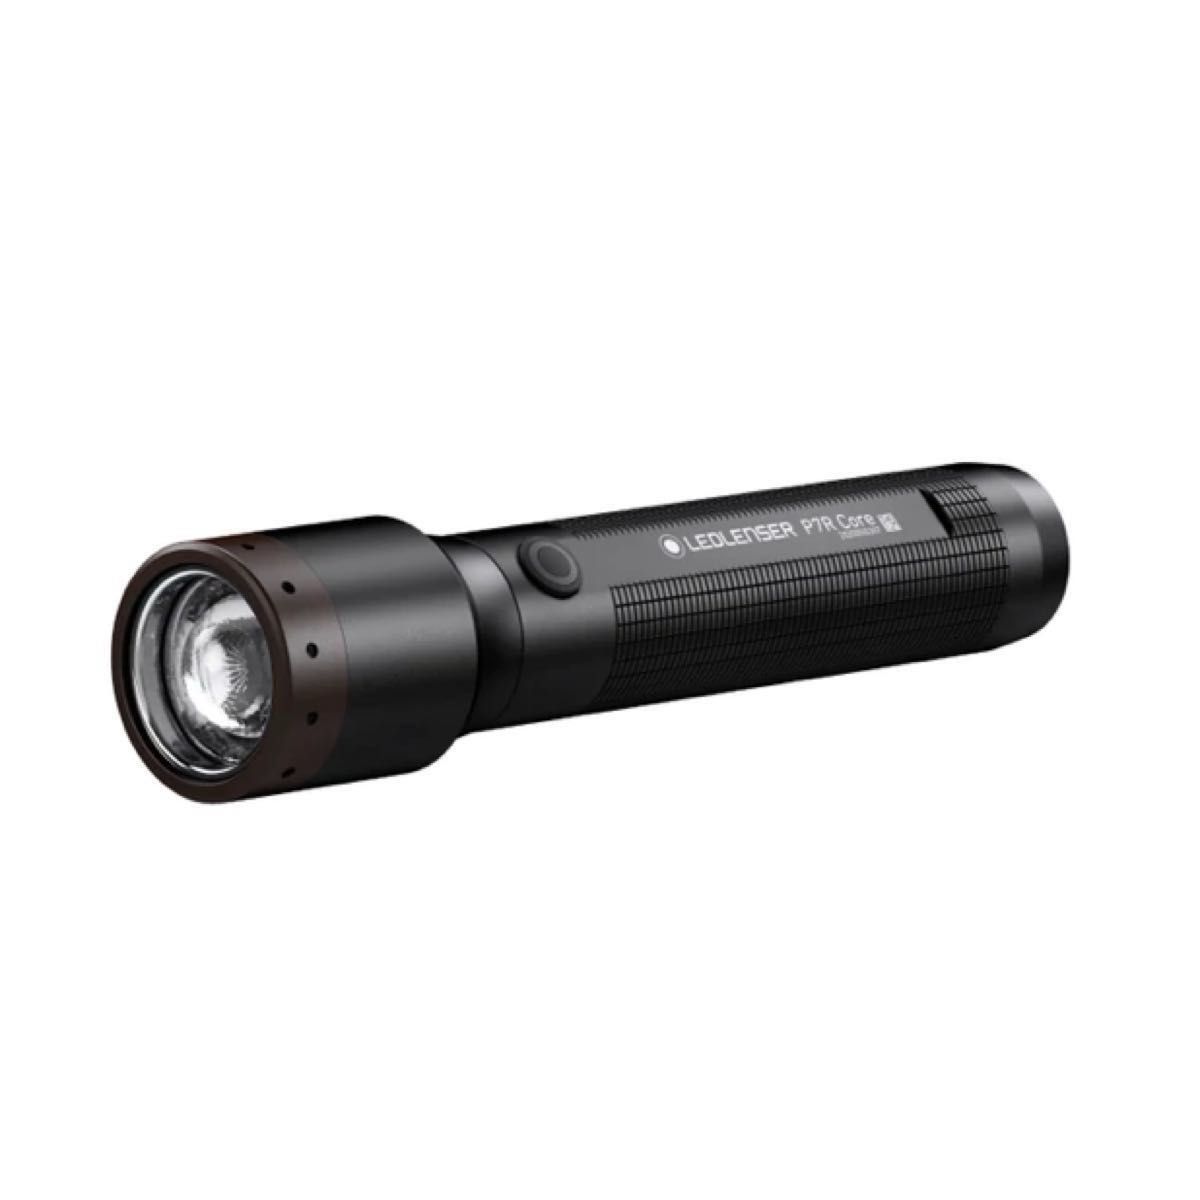 Led Lenser P7R Core 自転車取り付け用ブラケットセット　新品未使用